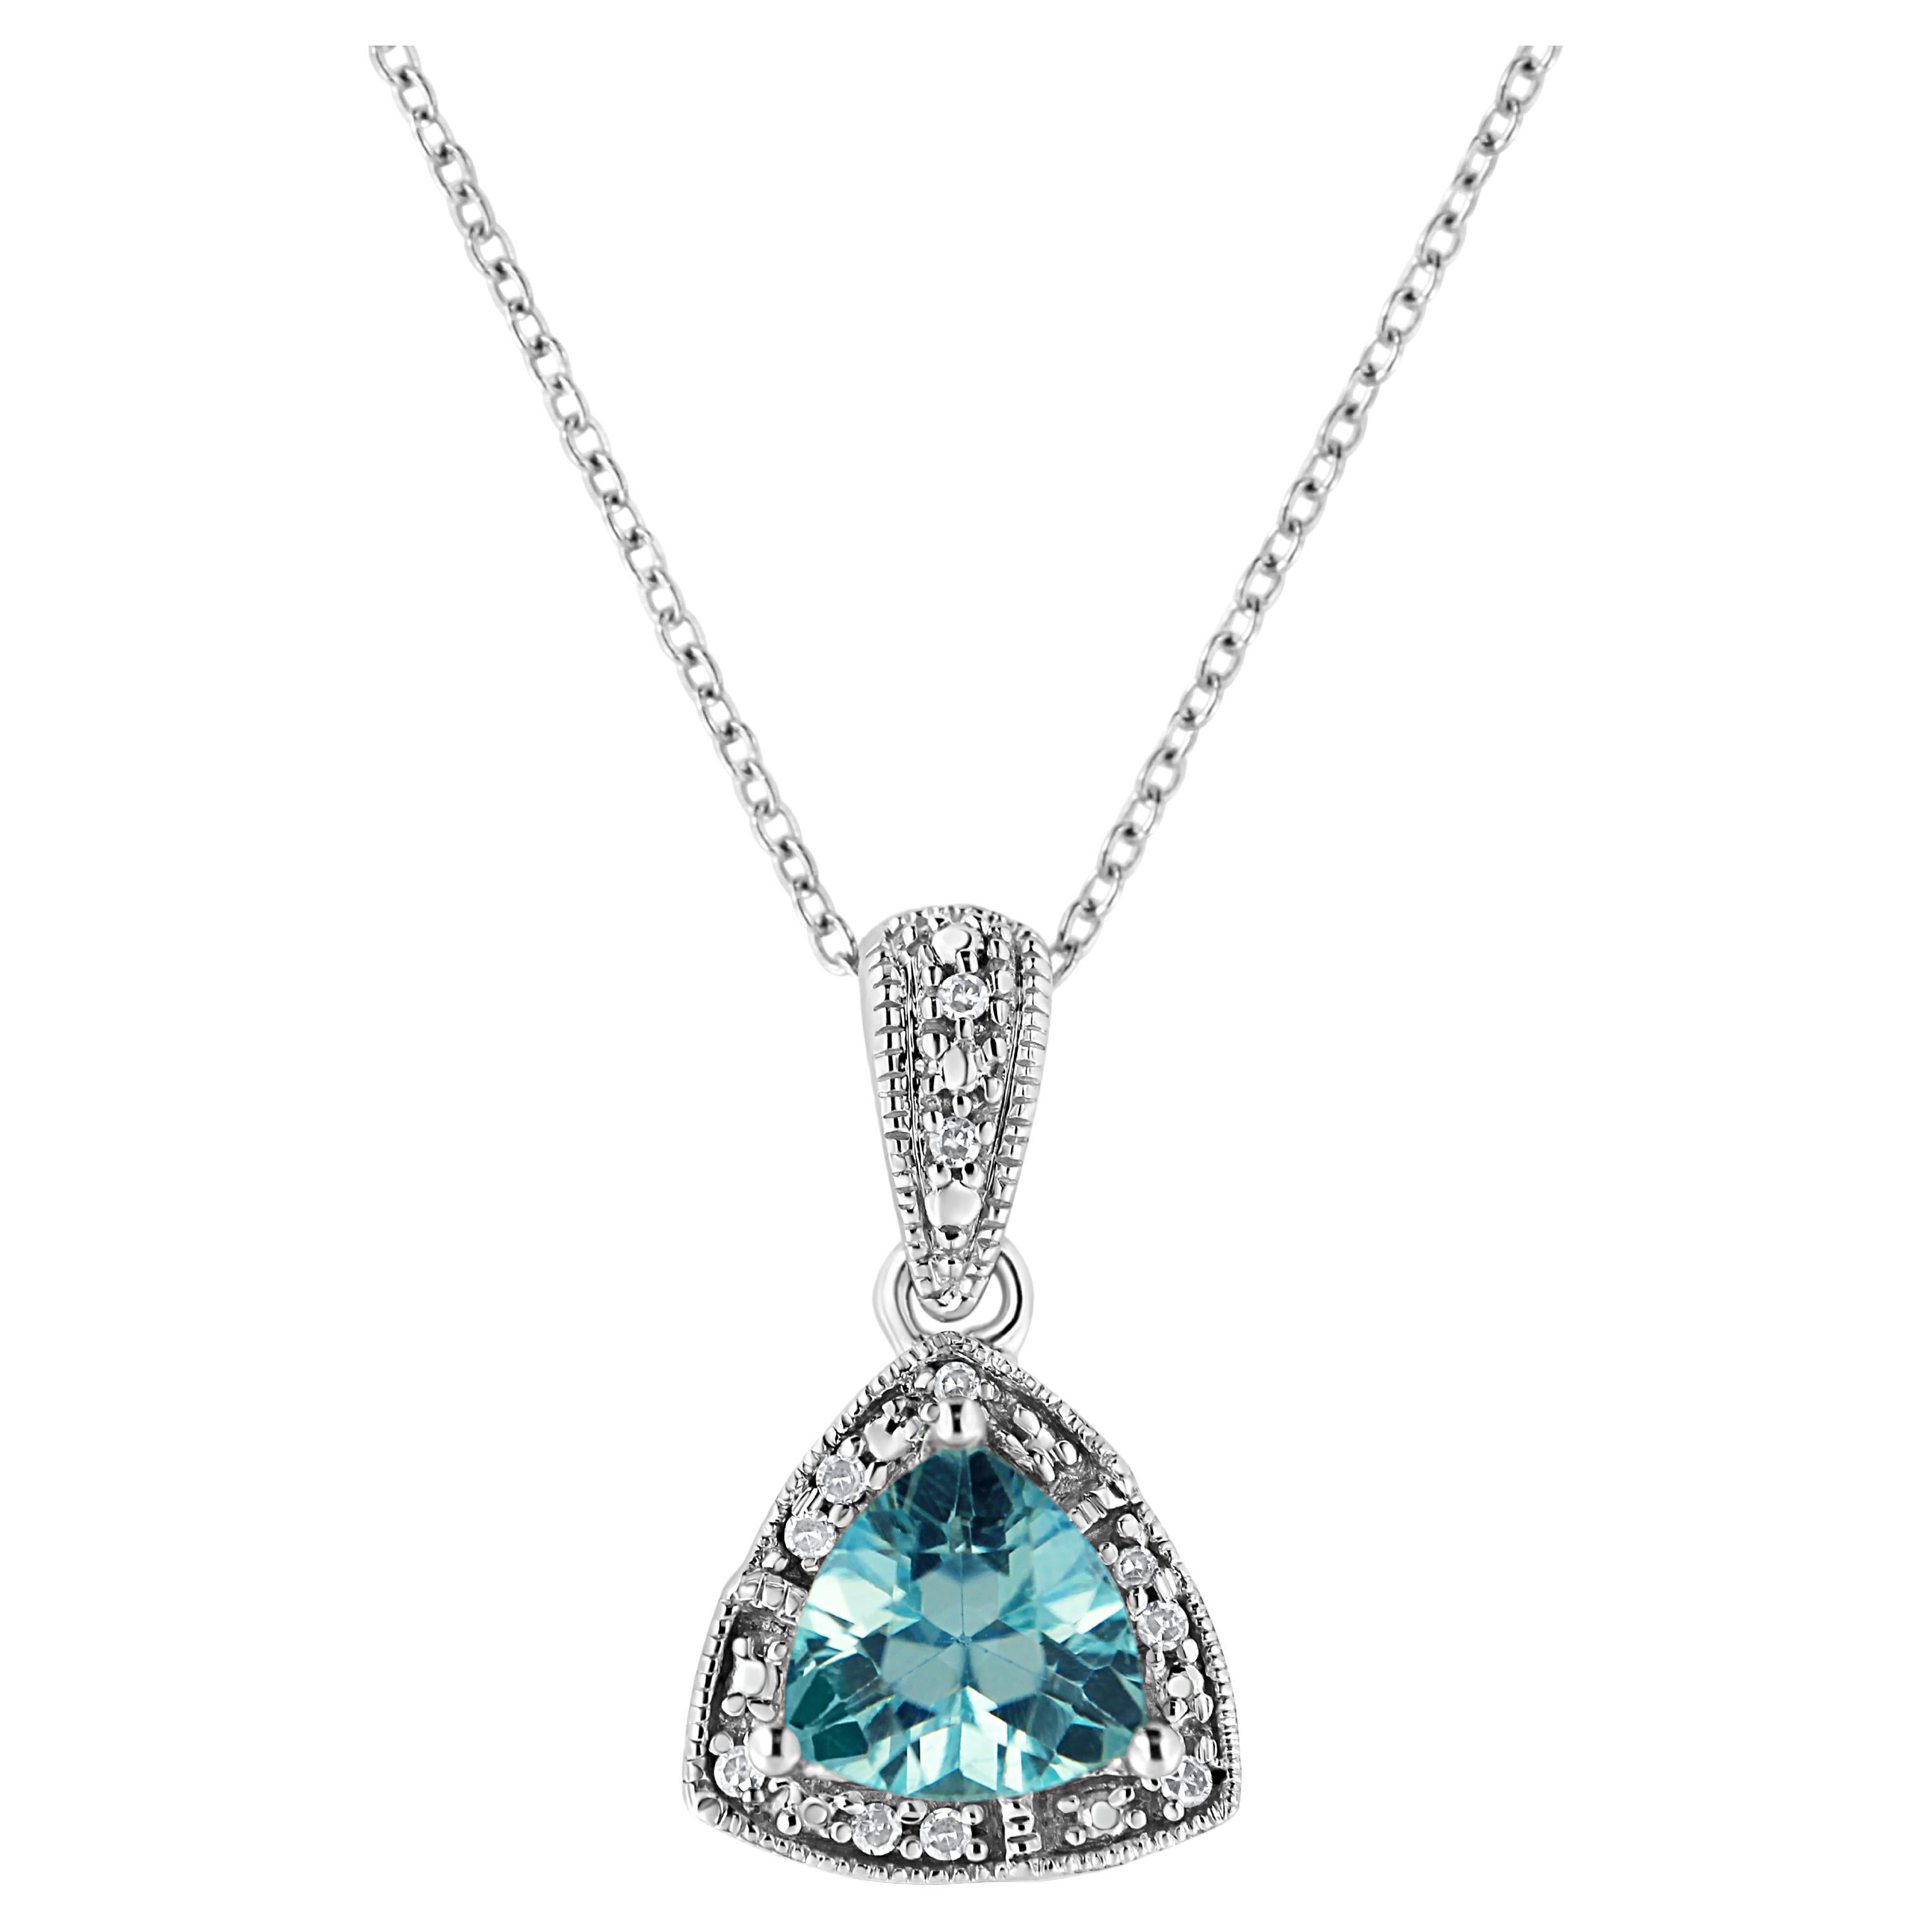 .925 Sterling Silver Blue Topaz Gemstone and Diamond Accent Pendant Necklace